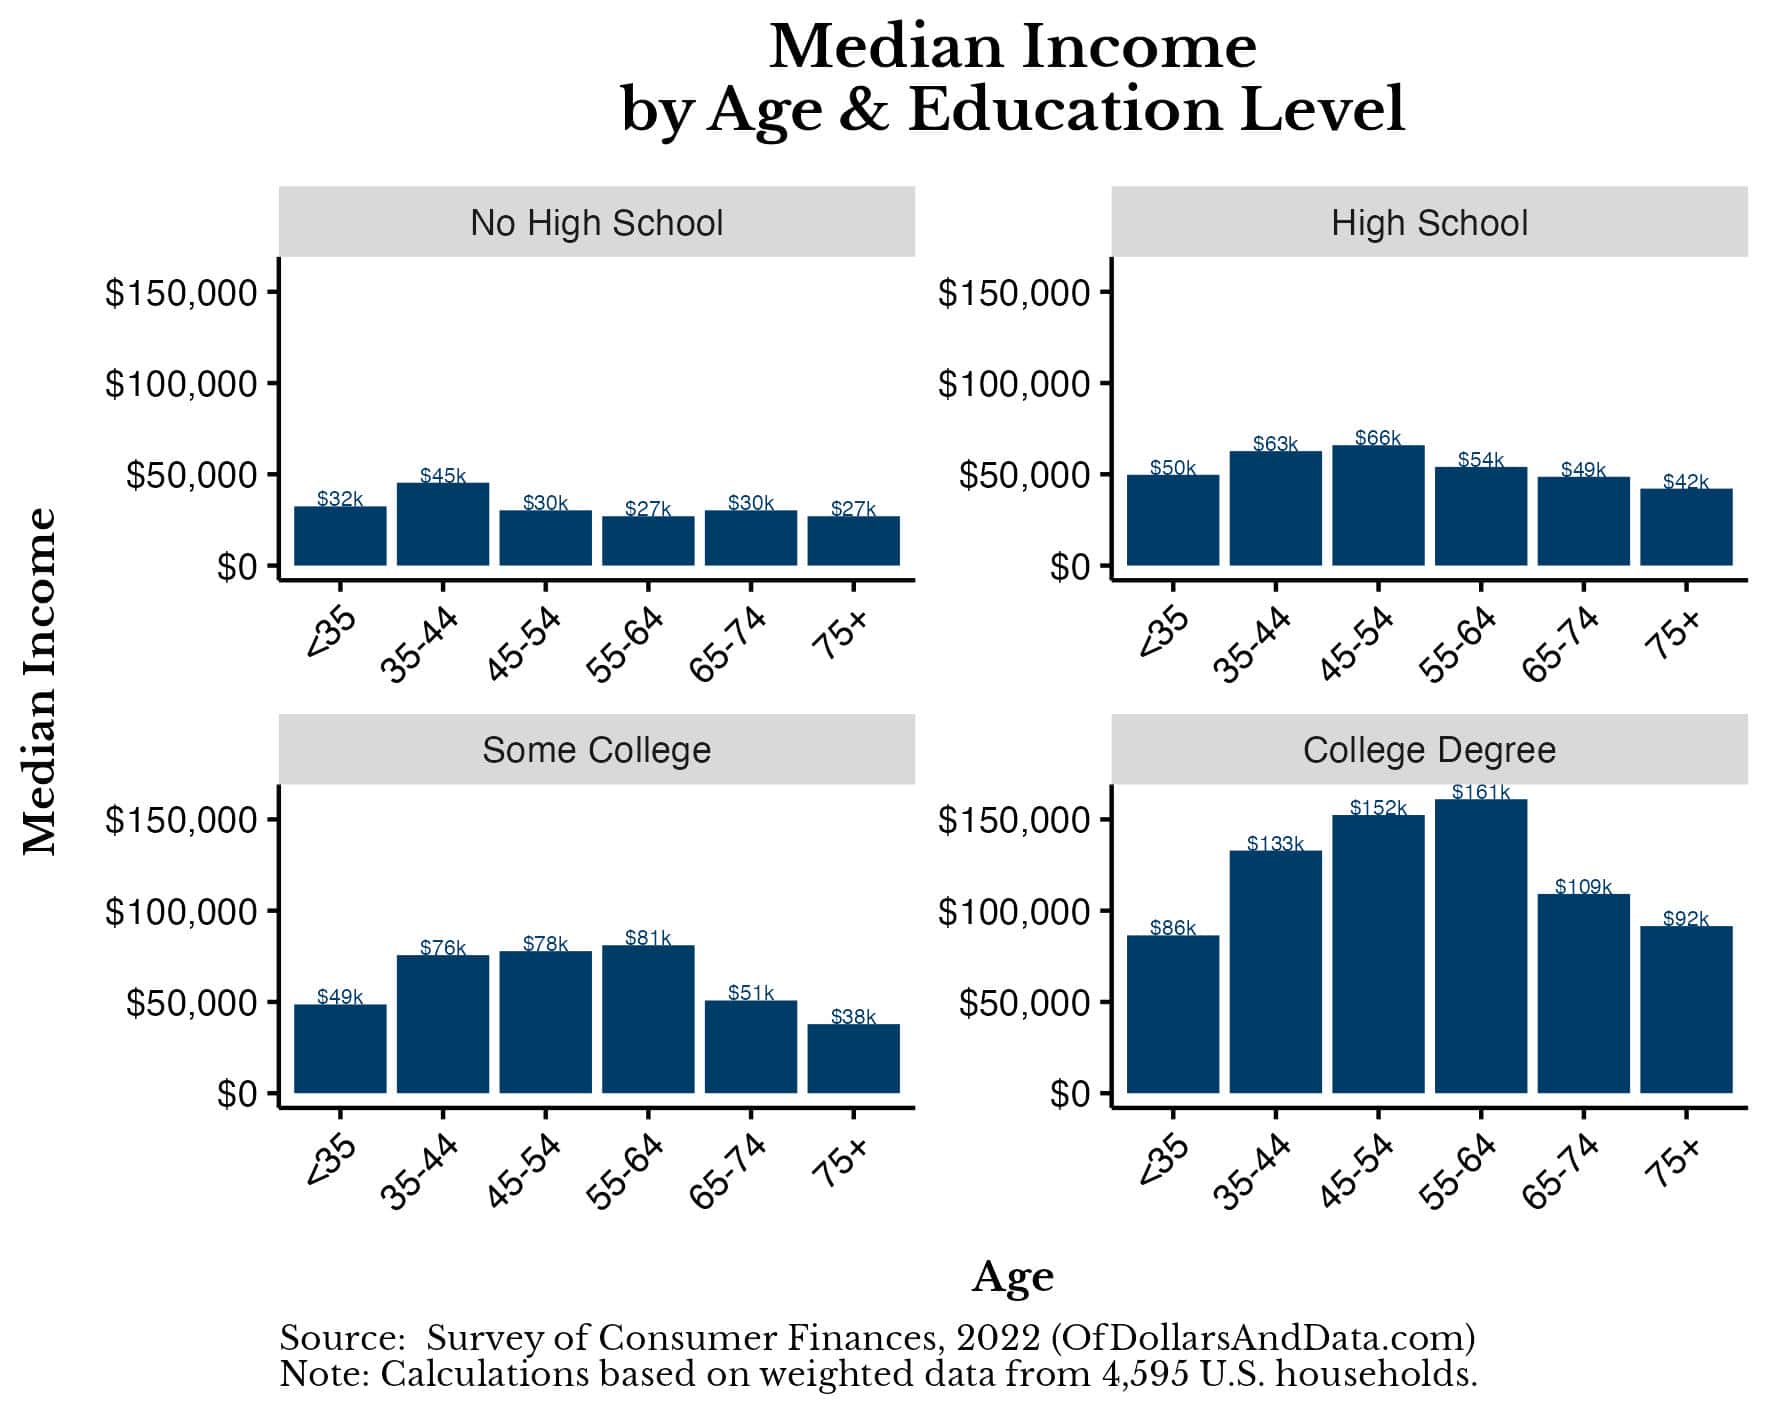 Median household income by age and education level in the U.S. from the 2022 Survey of Consumer Finances.